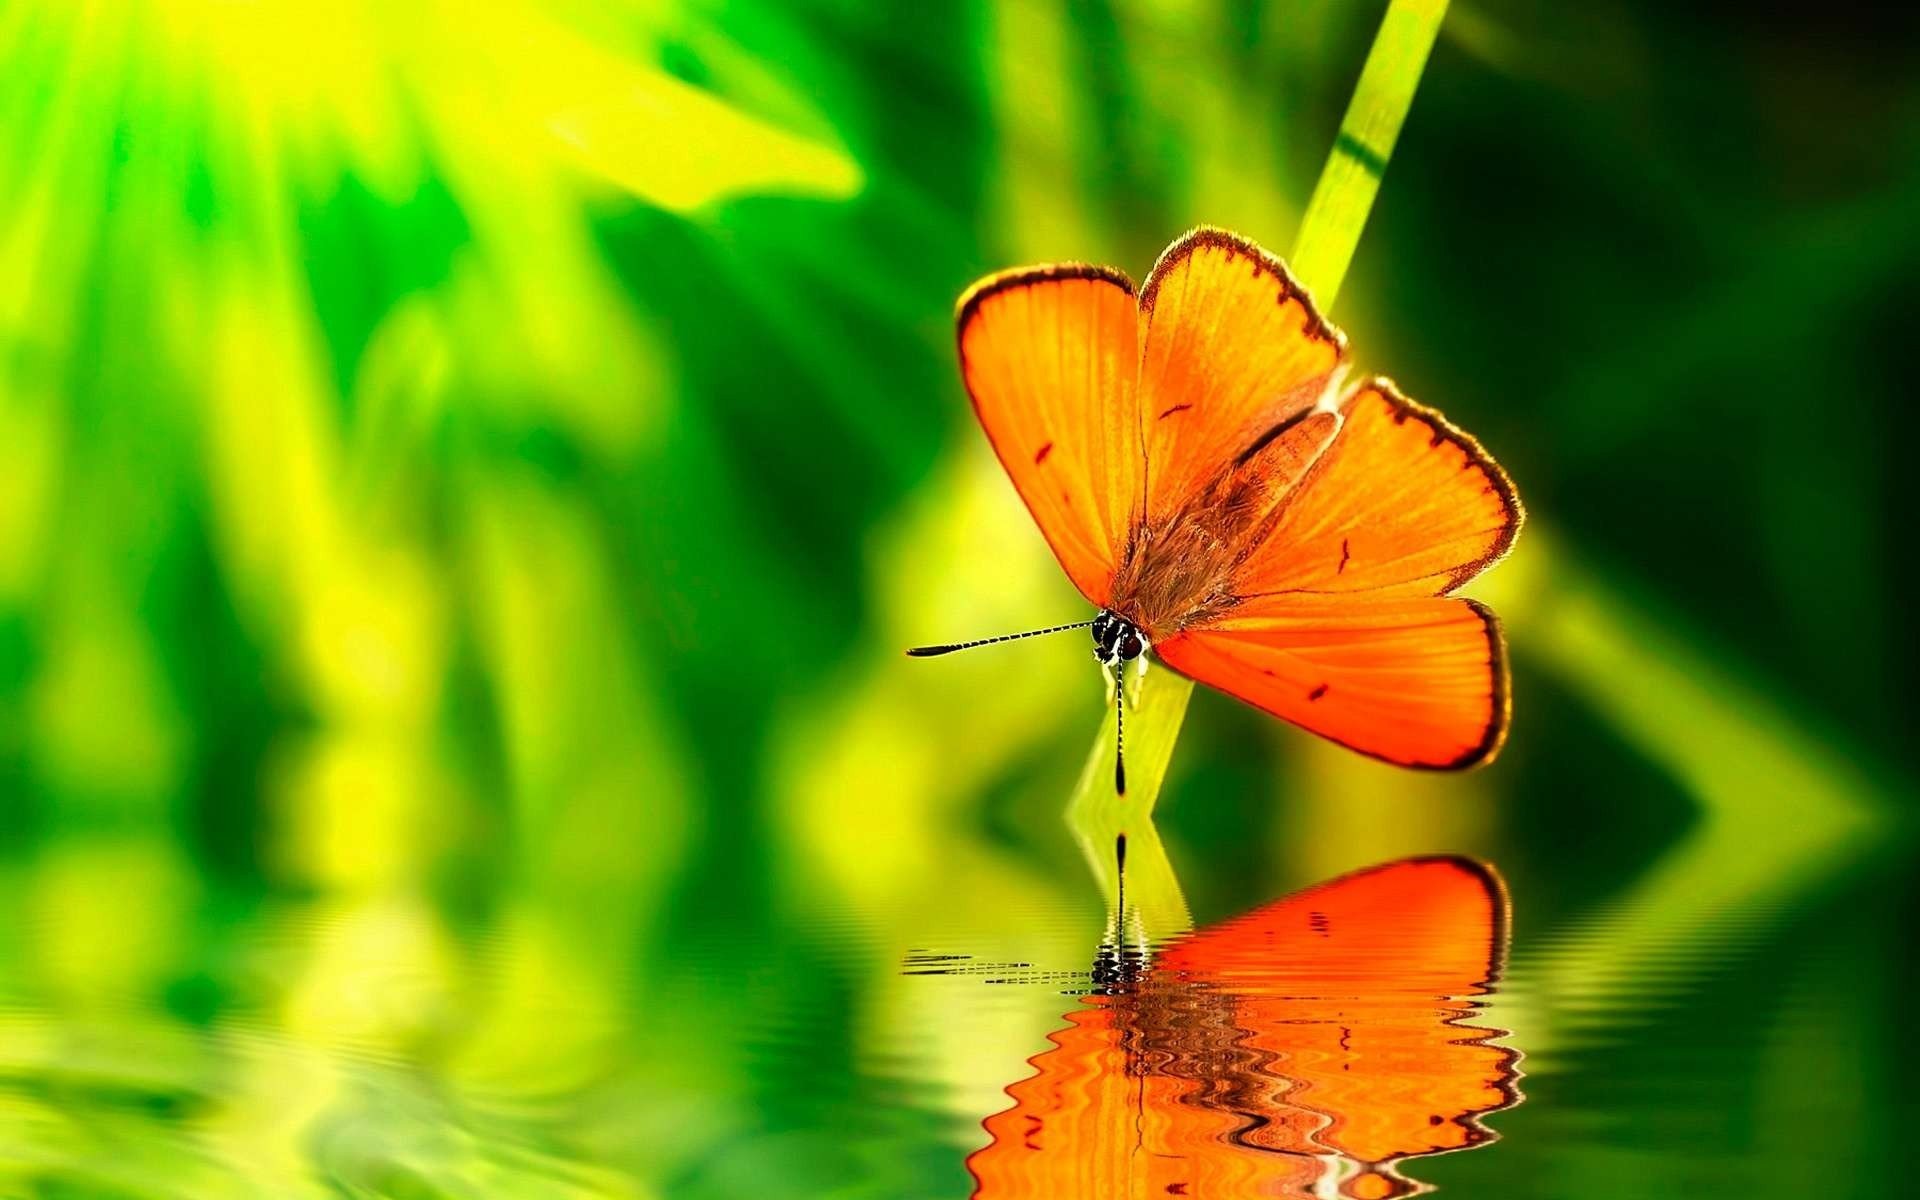 1920x1200 Green water nature orange insects wildlife reflections blurred background  butterflies wallpaper |  | 294097 | WallpaperUP